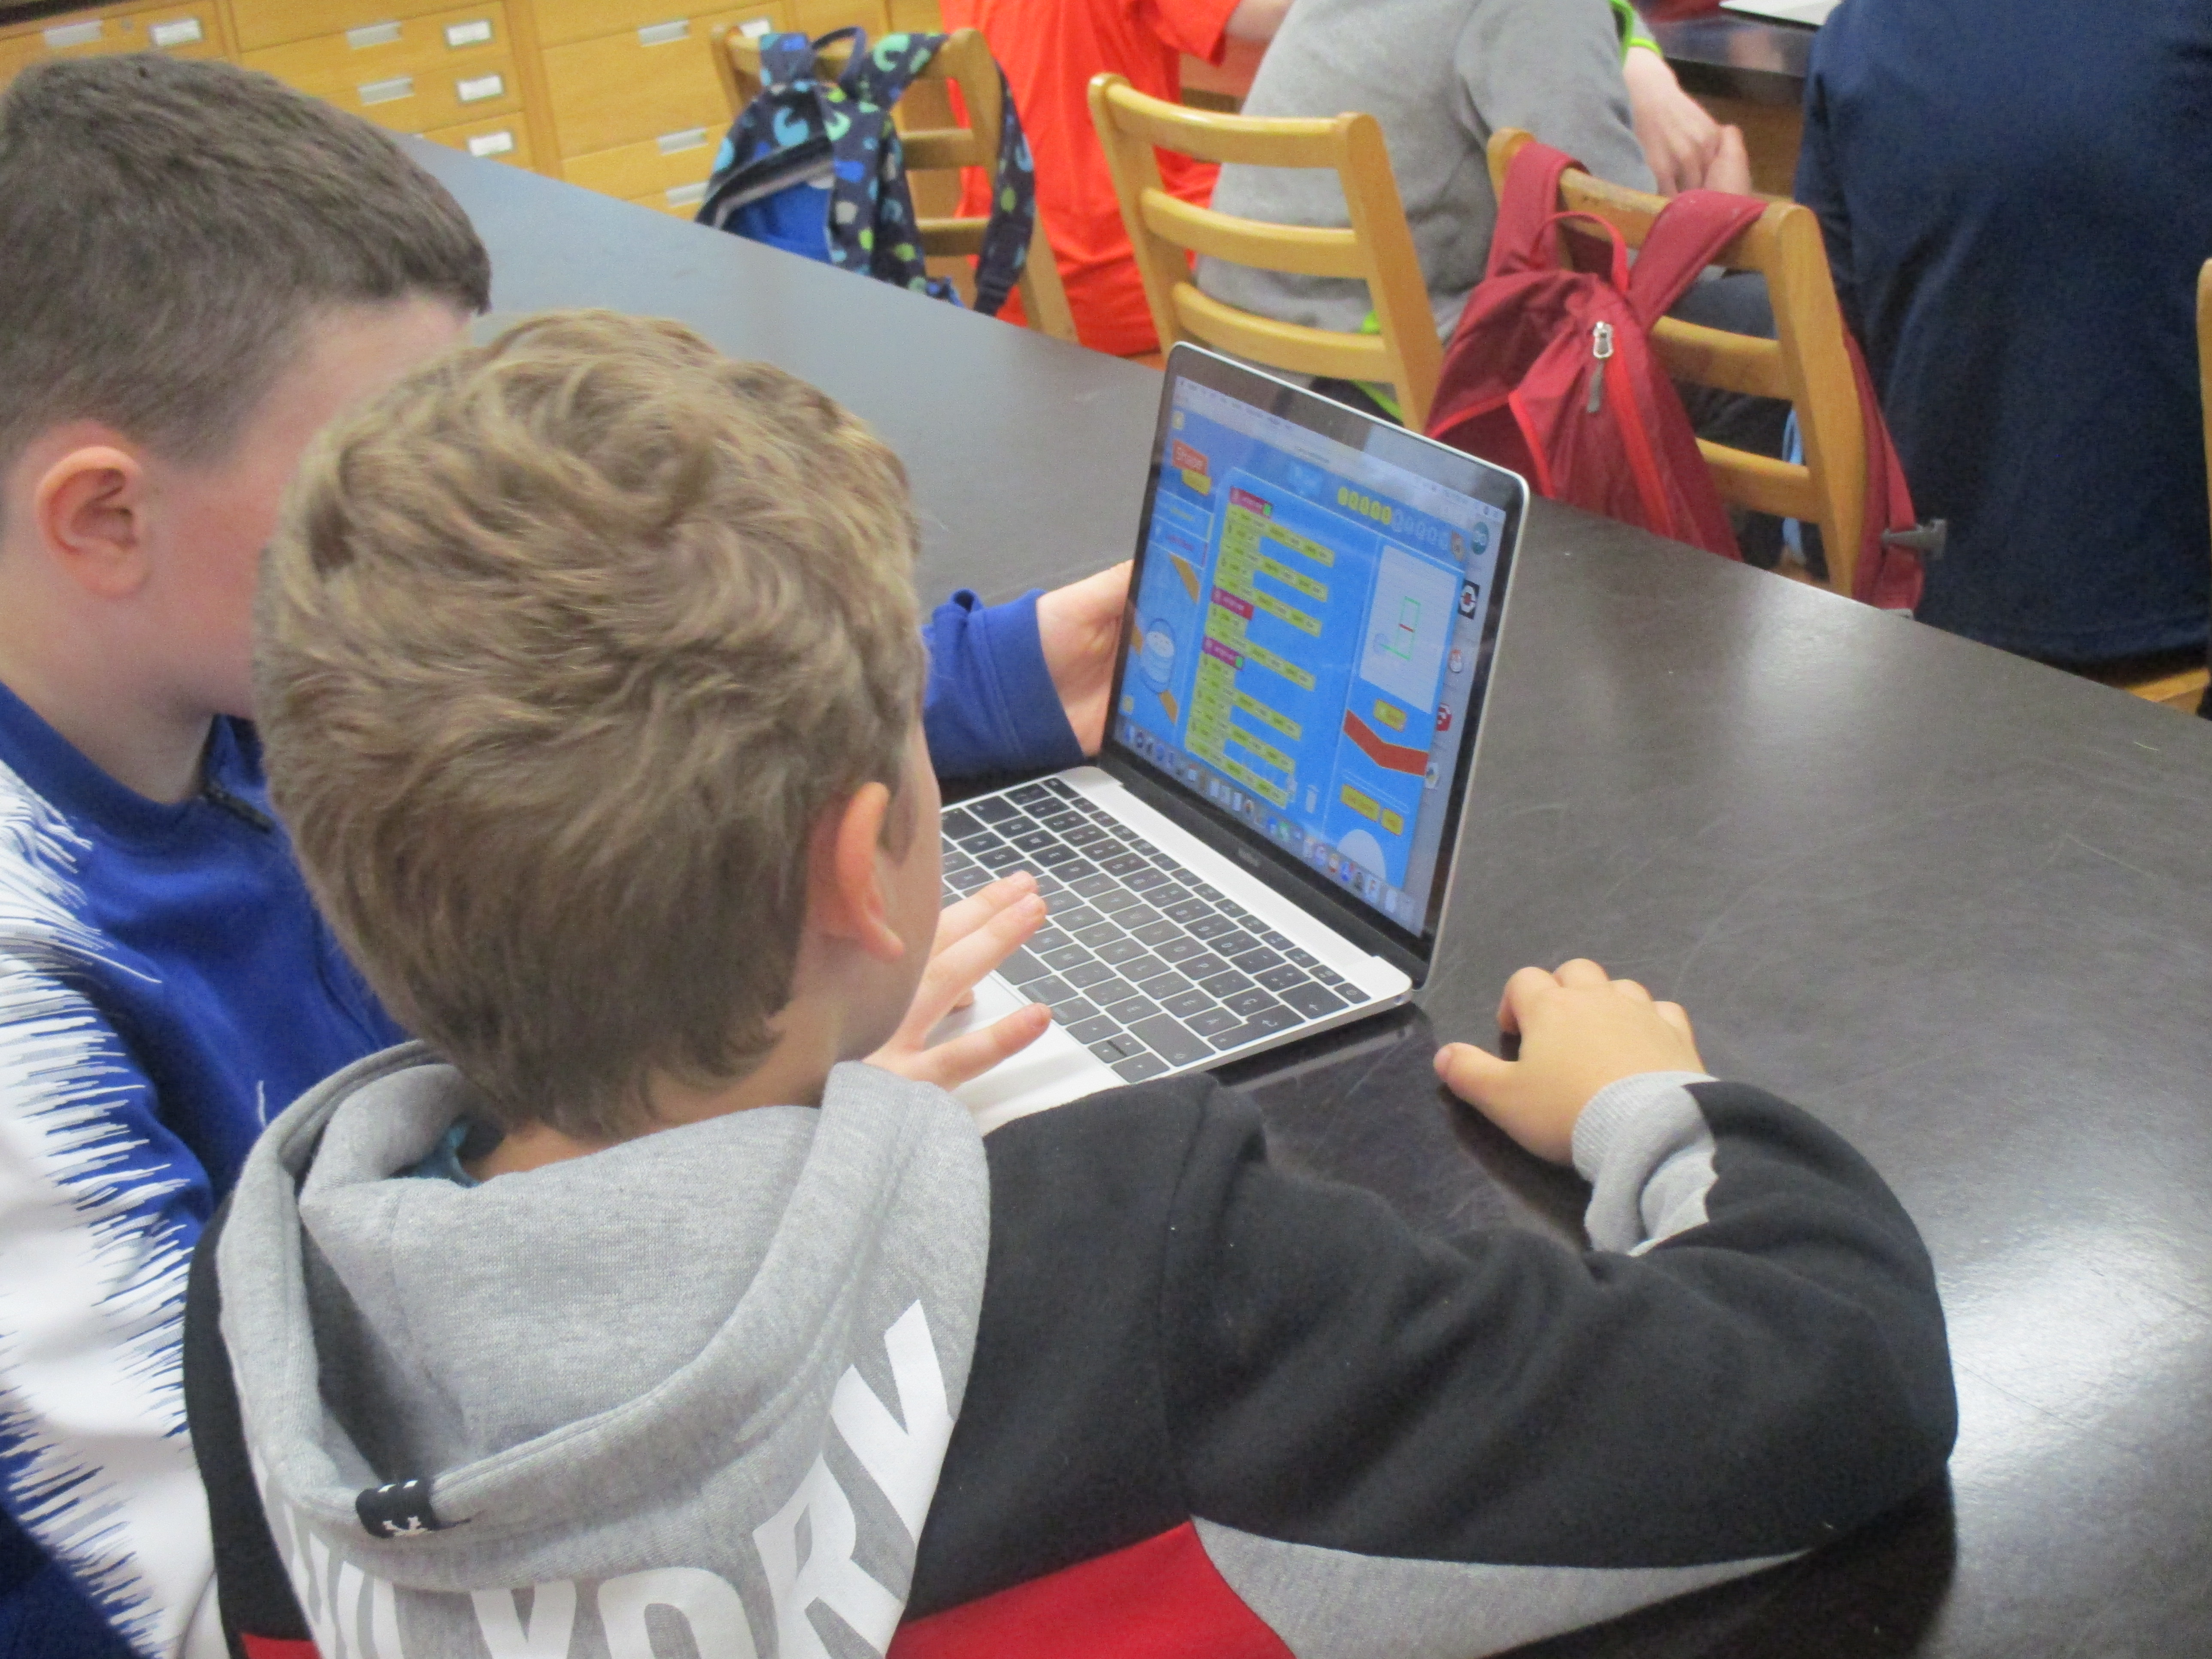 two boys using educational software on a laptop